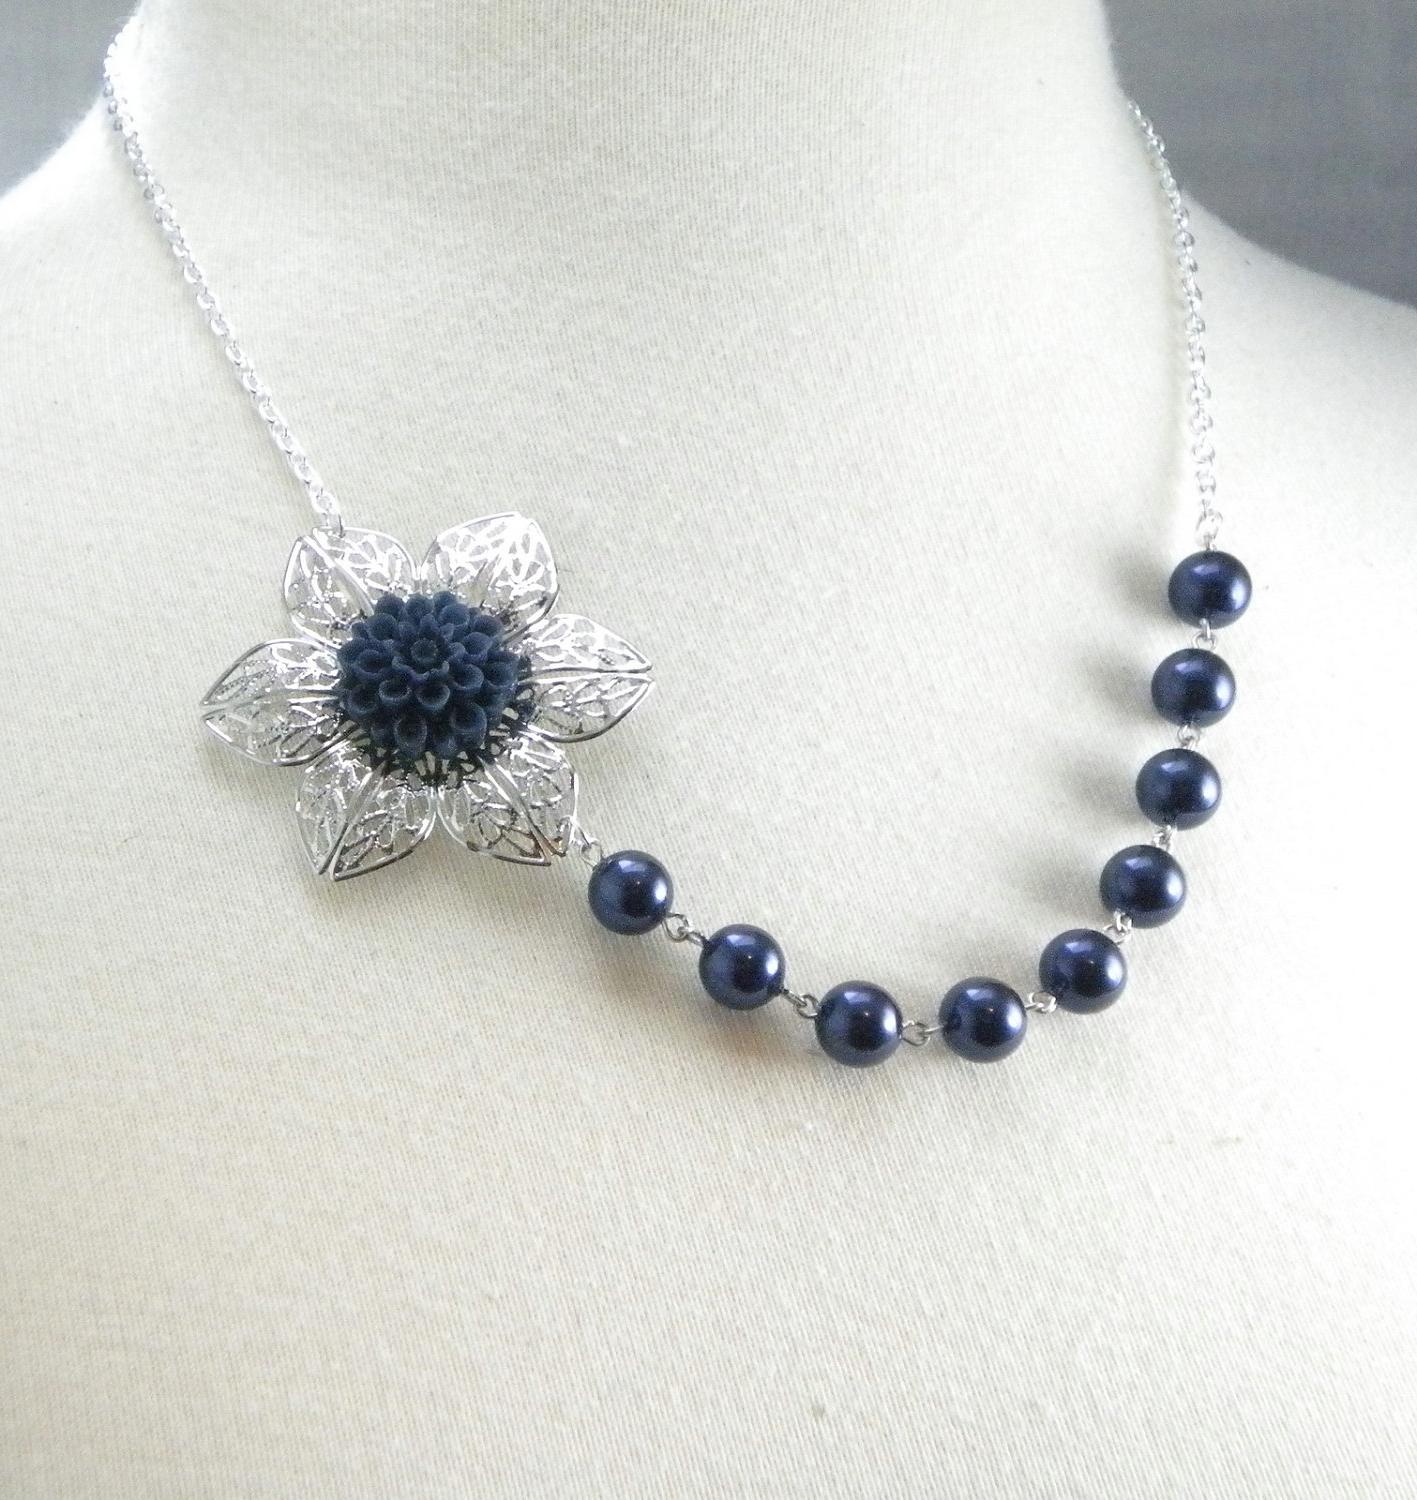 romantic wedding cake toppers Navy Blue and Silver Wedding Flower Necklace. From cymbaline84